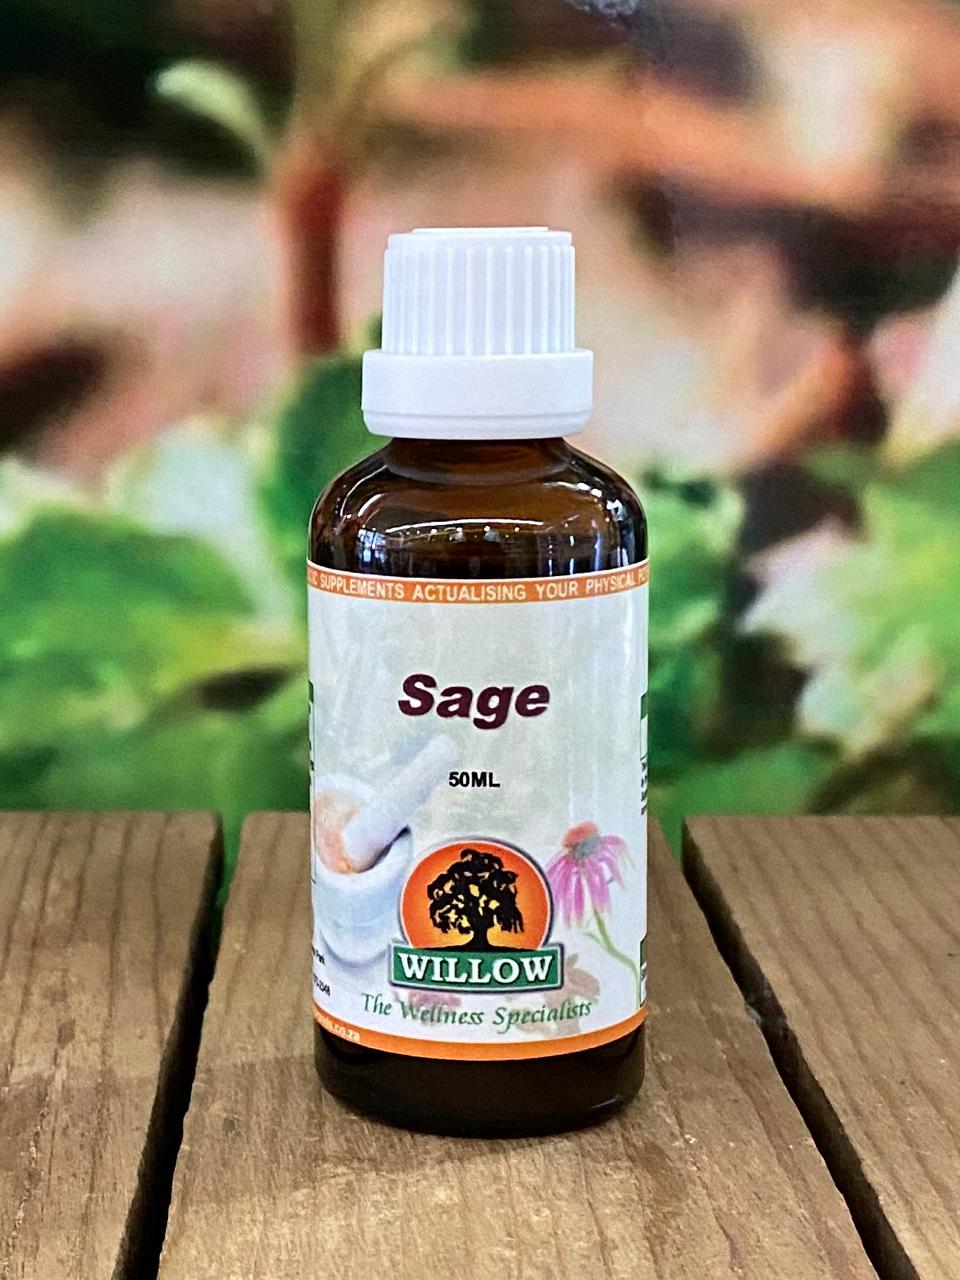 Willow Sage drops 50ml